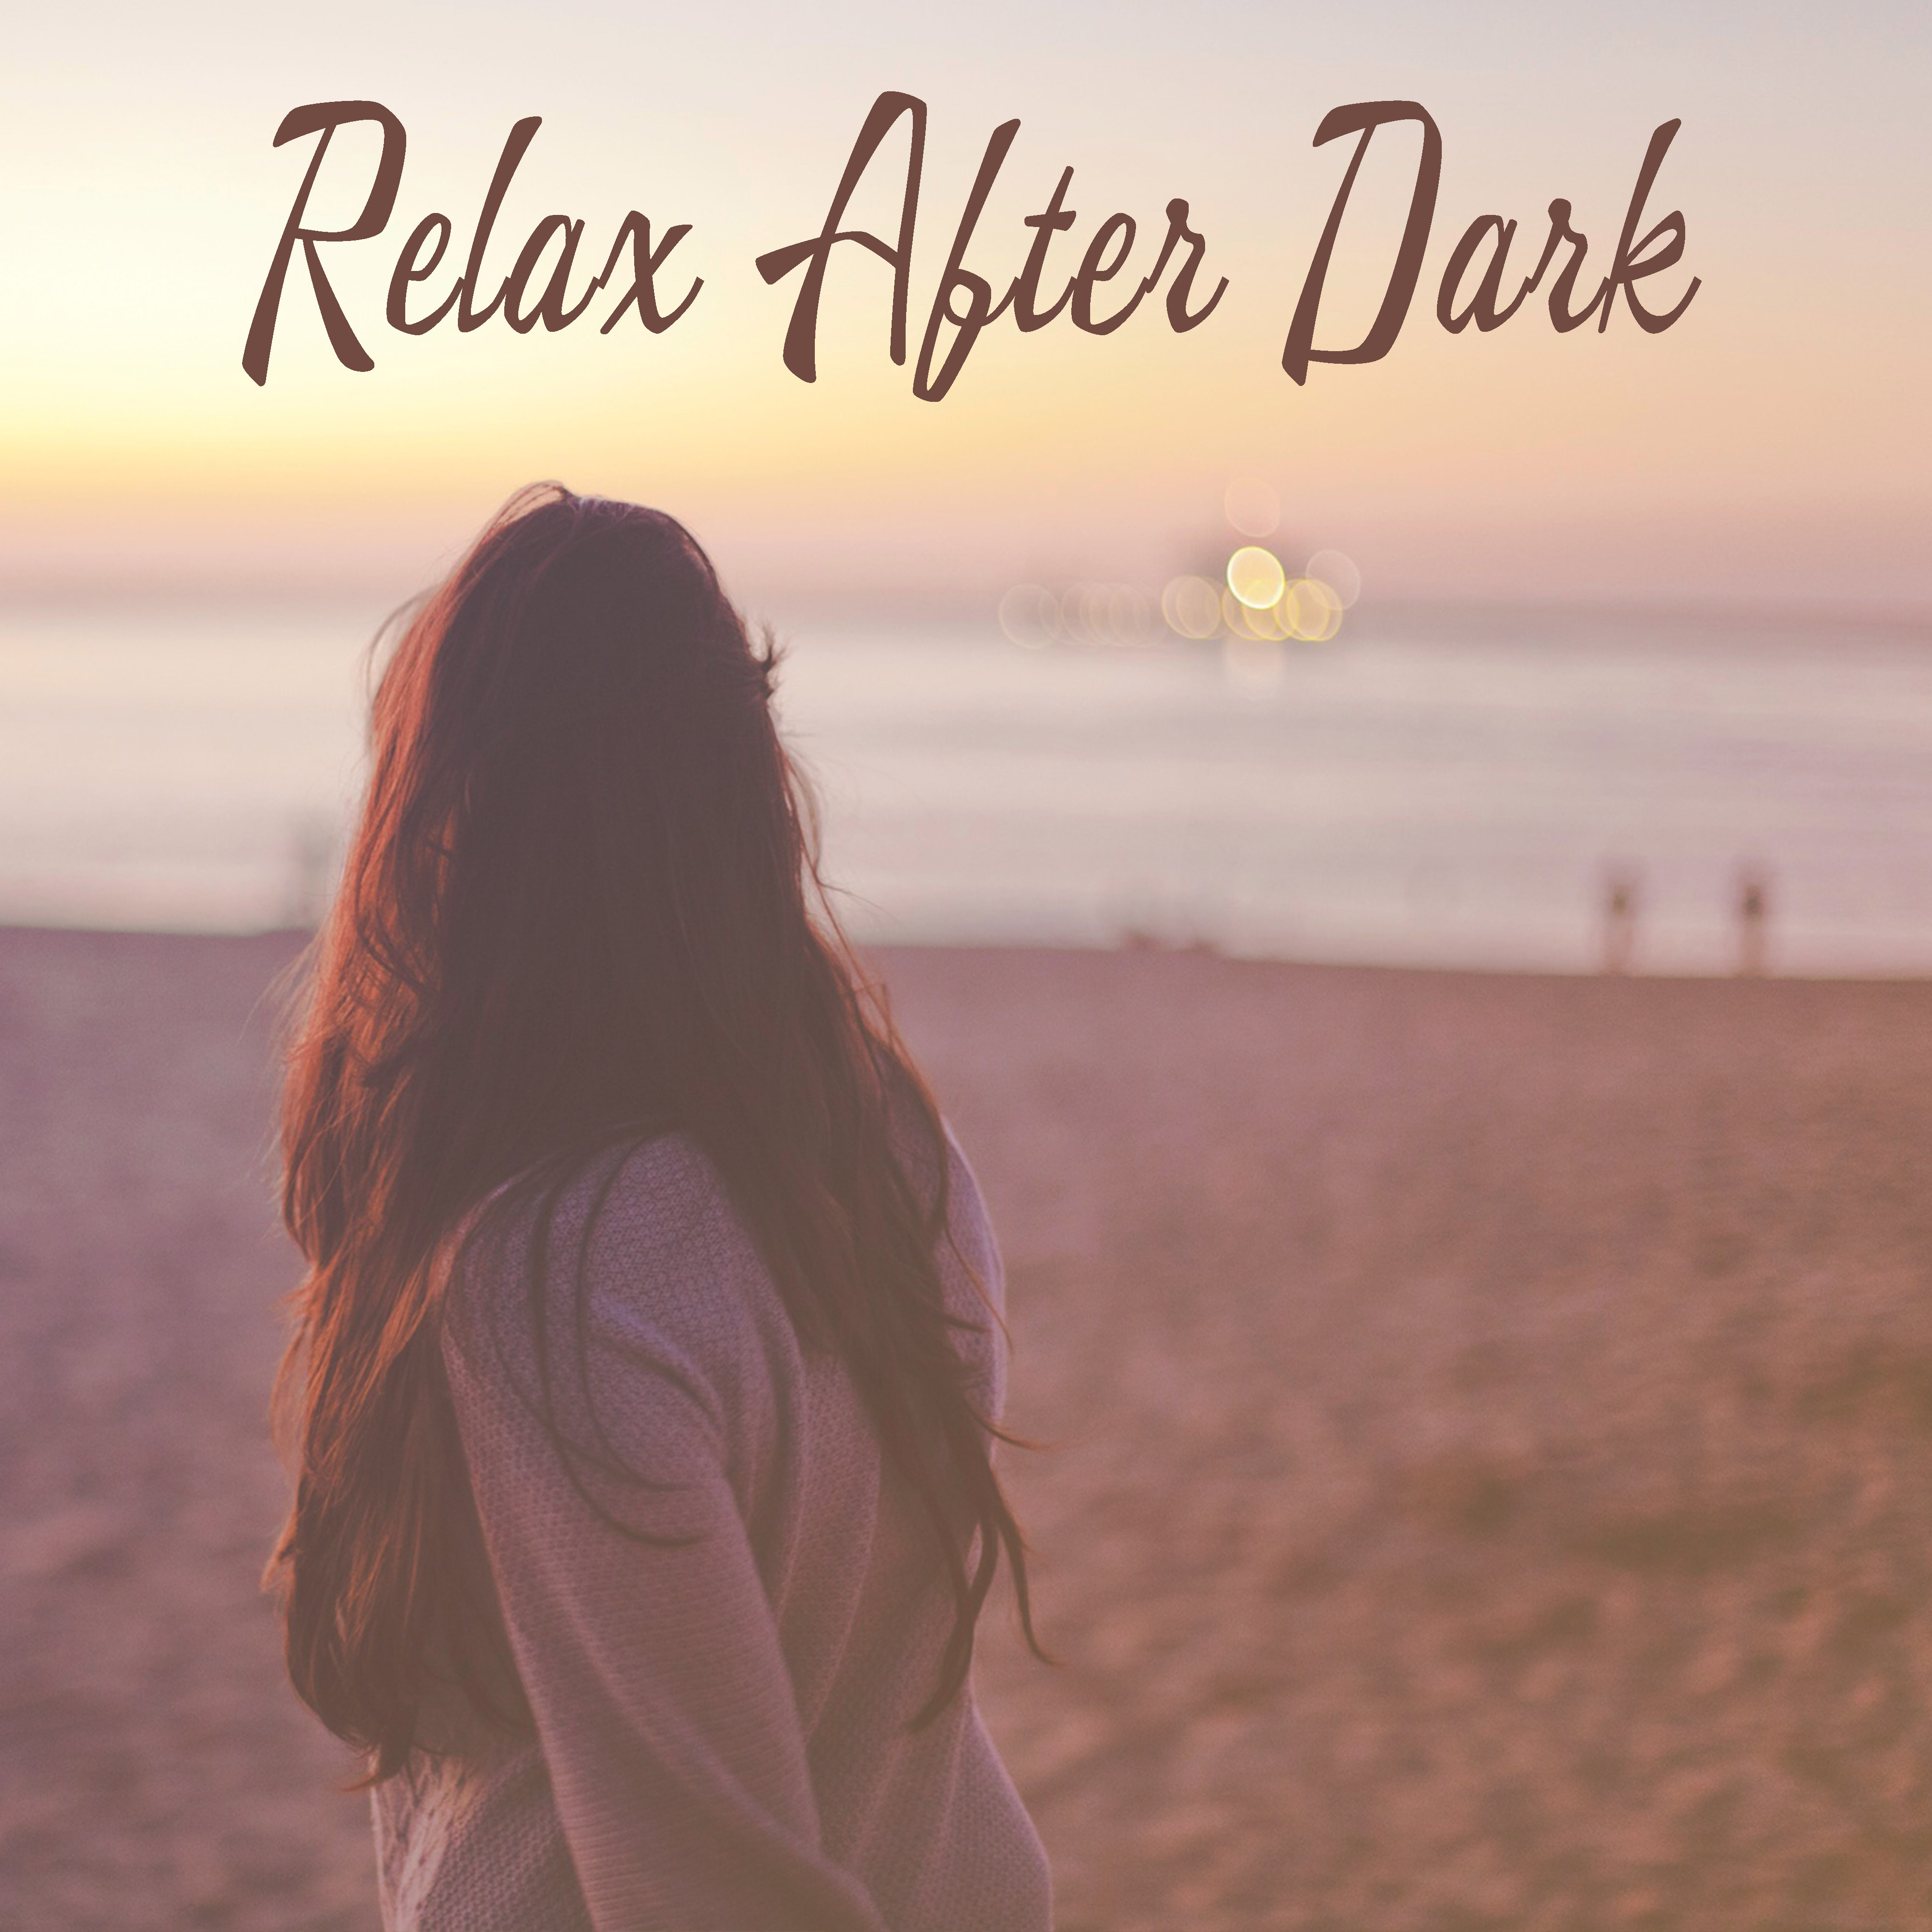 Relax After Dark  Relaxing Music, Pure Mind, Nature Sounds, Peaceful Chill Out Music, Deep Meditation, Stress Relief